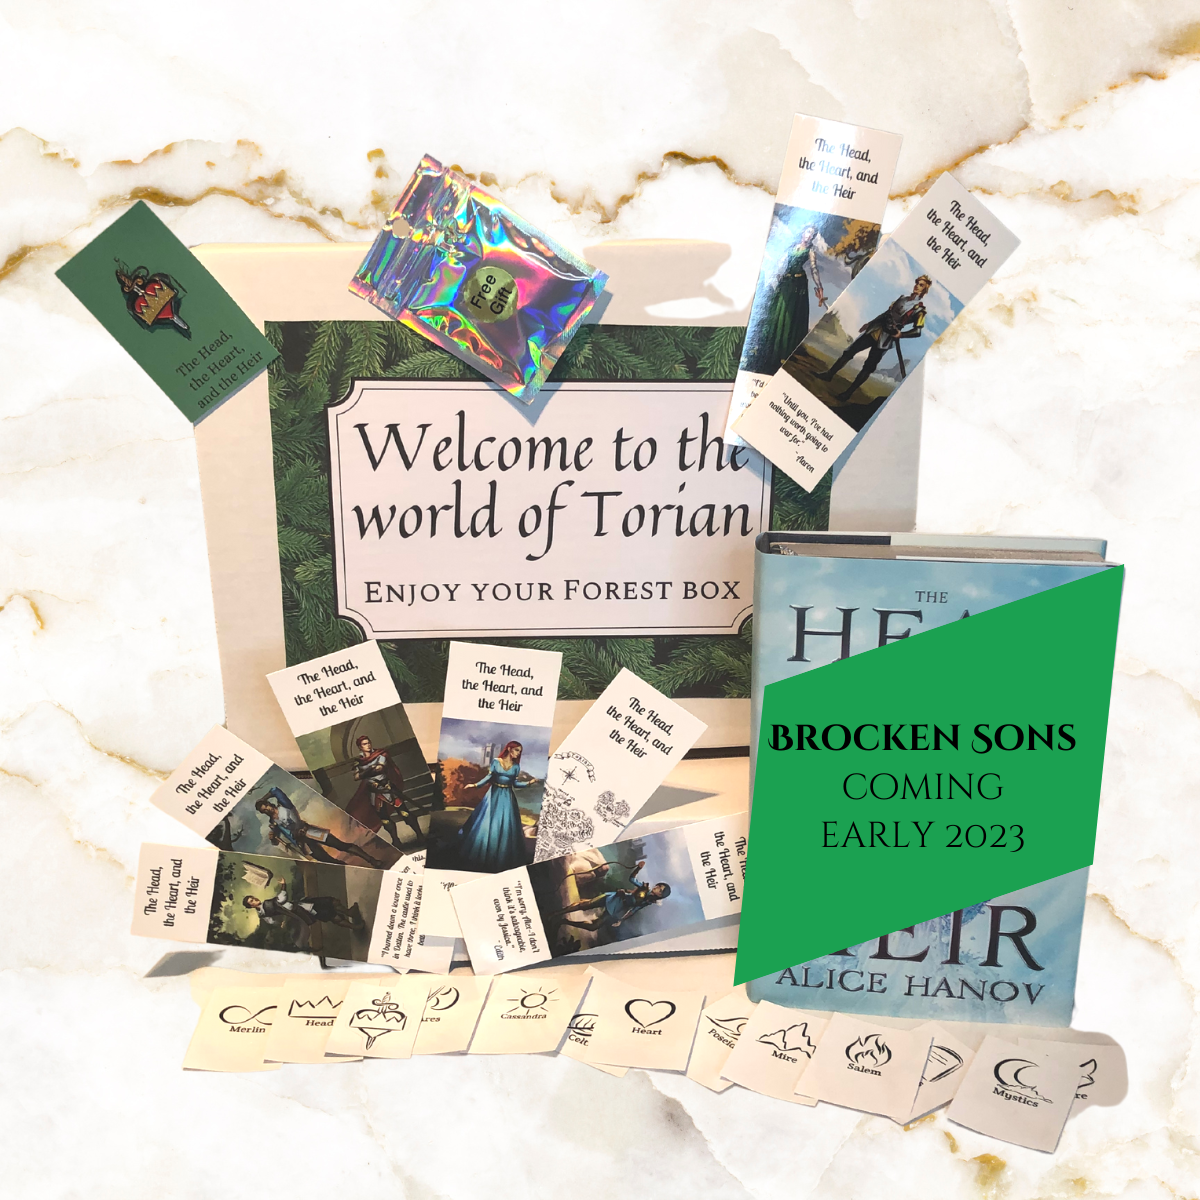 Image of Forest box - includes photos of the items in the box - including signed hardcover book 2, enamal pin, set of 8 bookmarks, set of 13 stickers, 2 small surprises